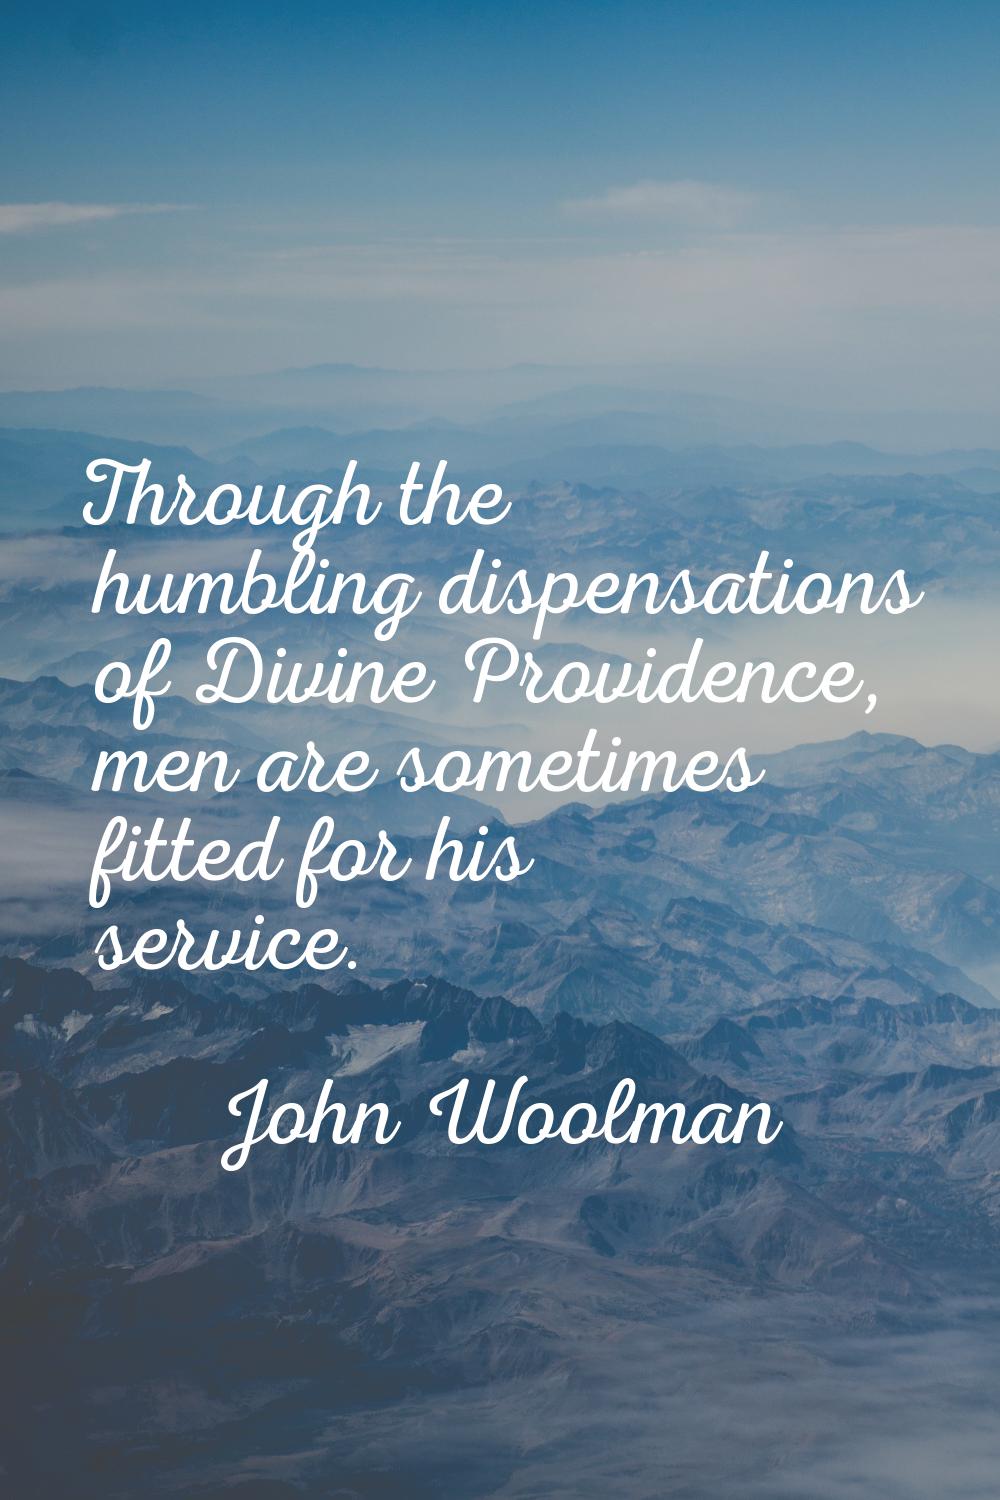 Through the humbling dispensations of Divine Providence, men are sometimes fitted for his service.